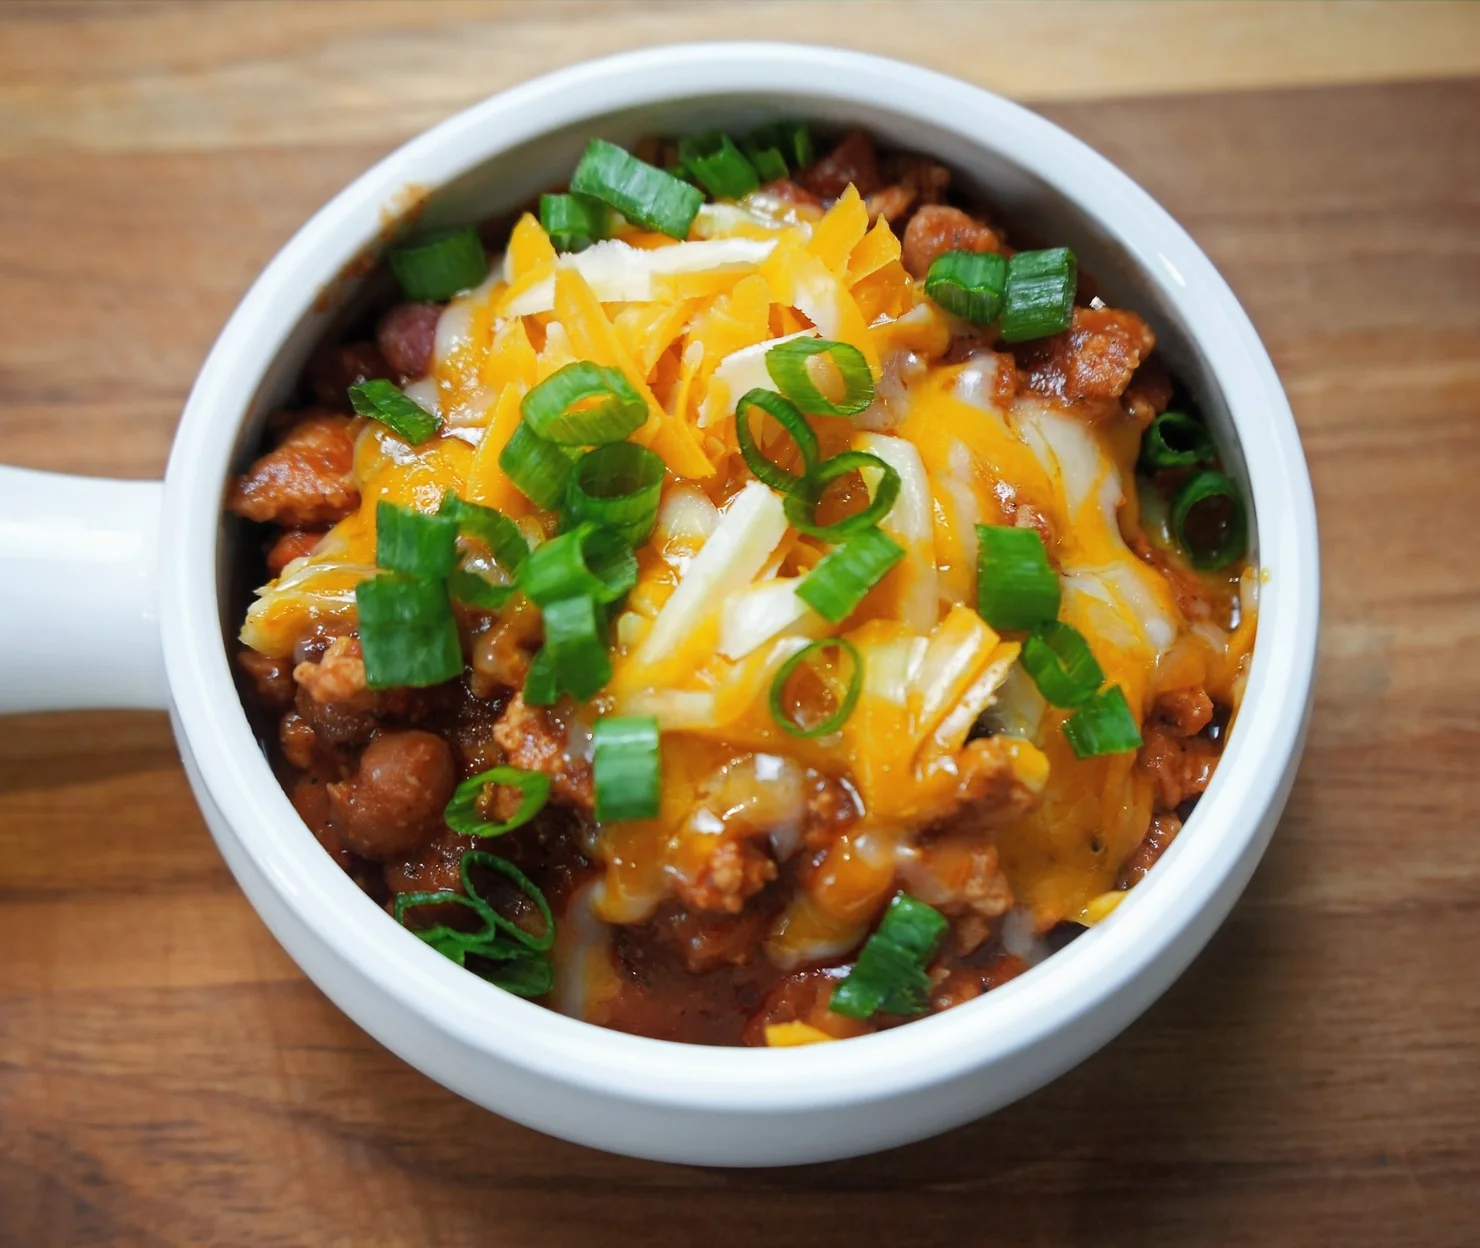 chicken chili served in a bowl garnished with cheese and spring onions